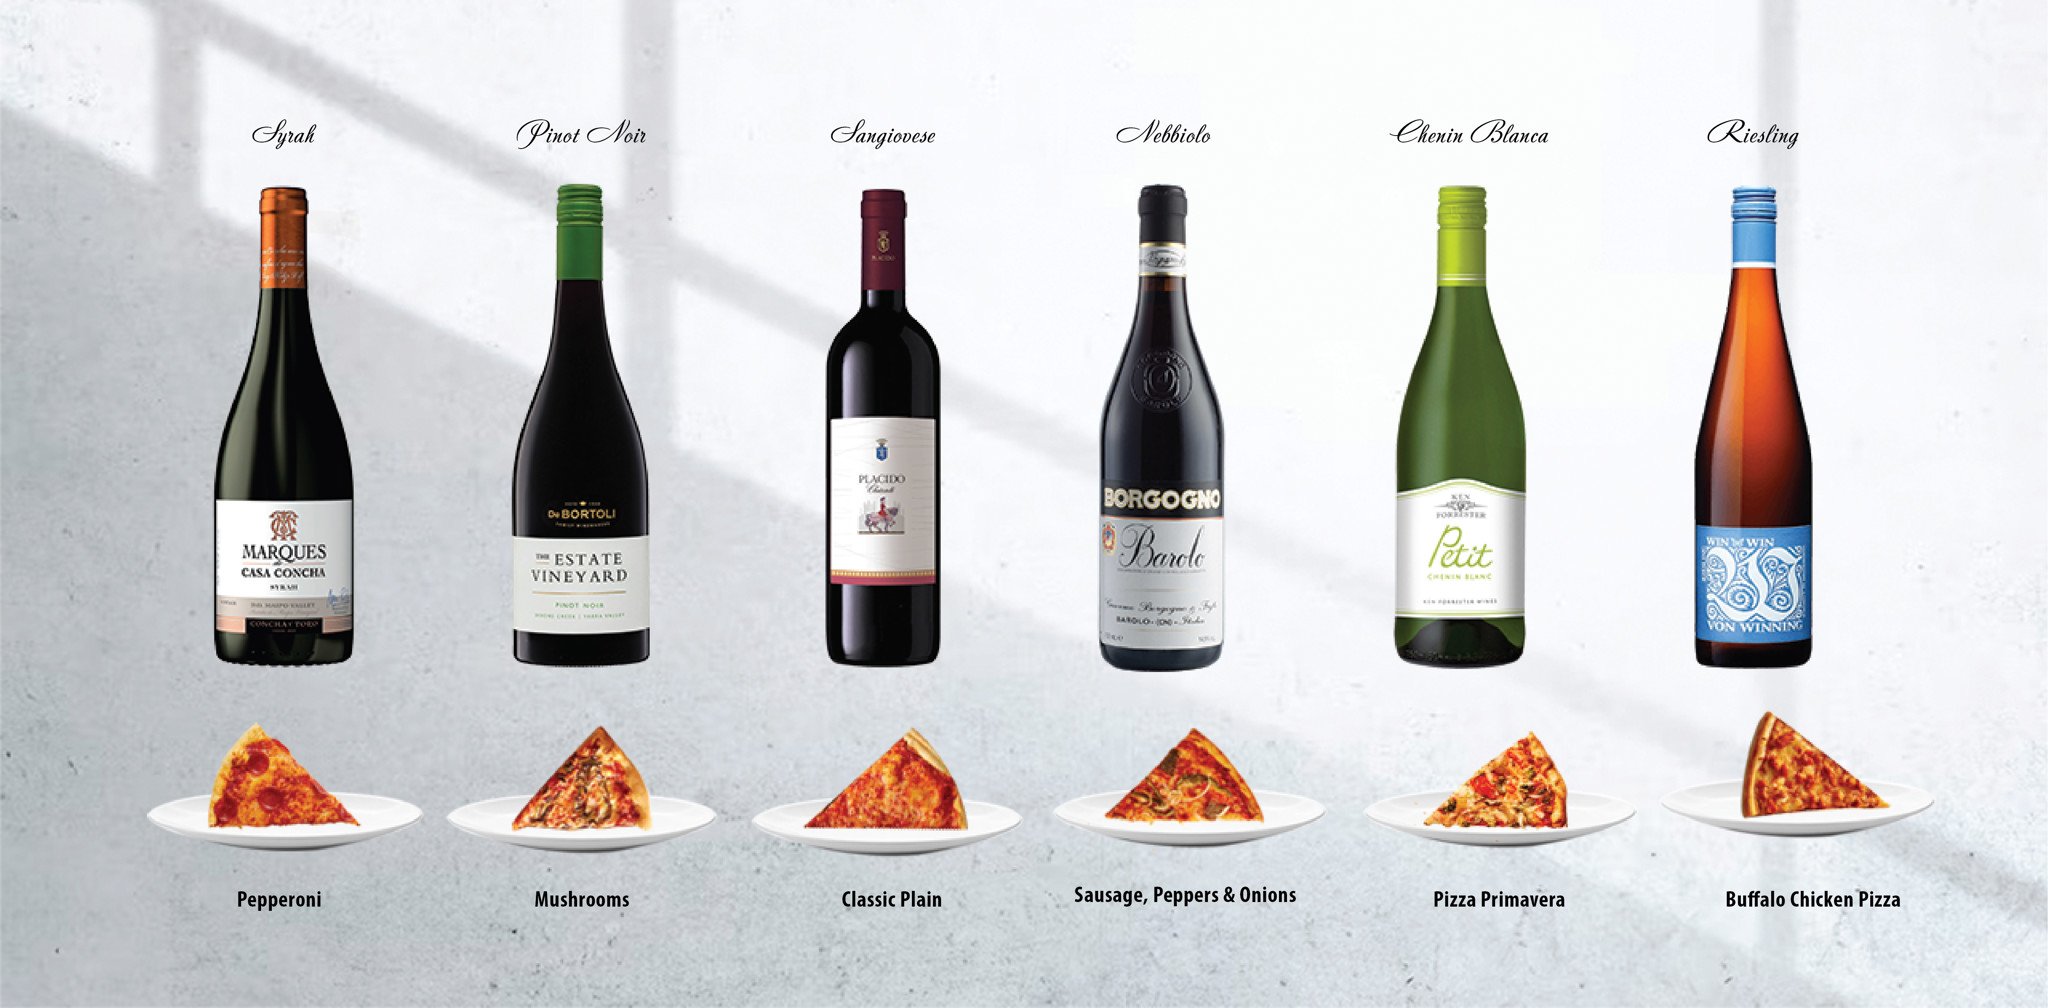 THE ULTIMATE GUIDE TO PAIRING WINE WITH EVERY KIND OF PIZZA